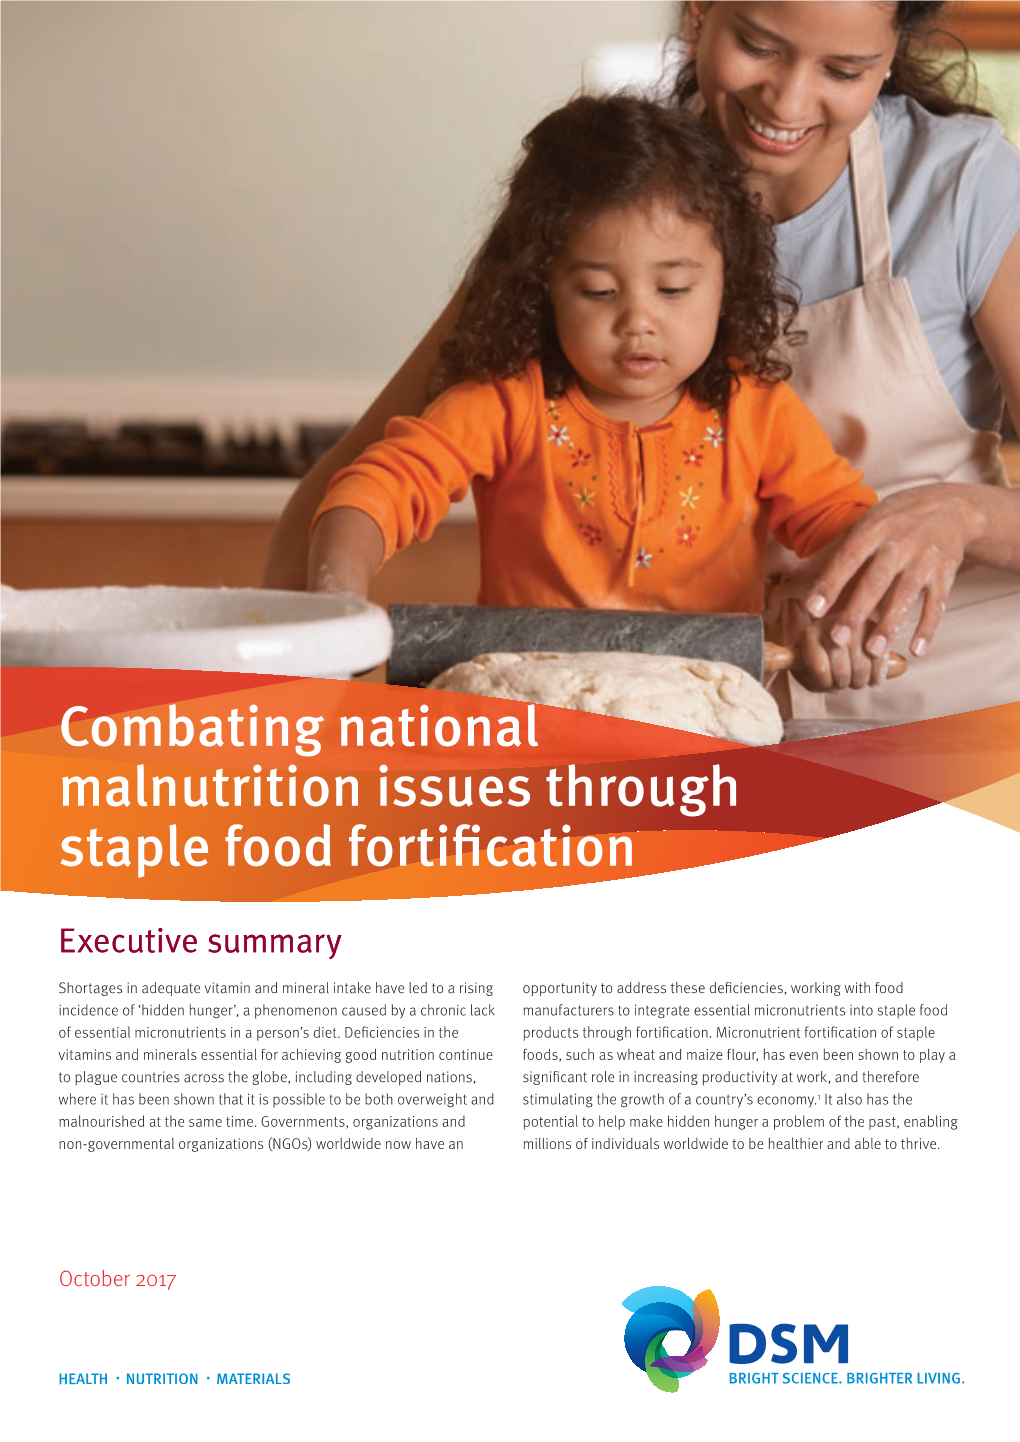 Combating National Malnutrition Issues Through Staple Food Fortification